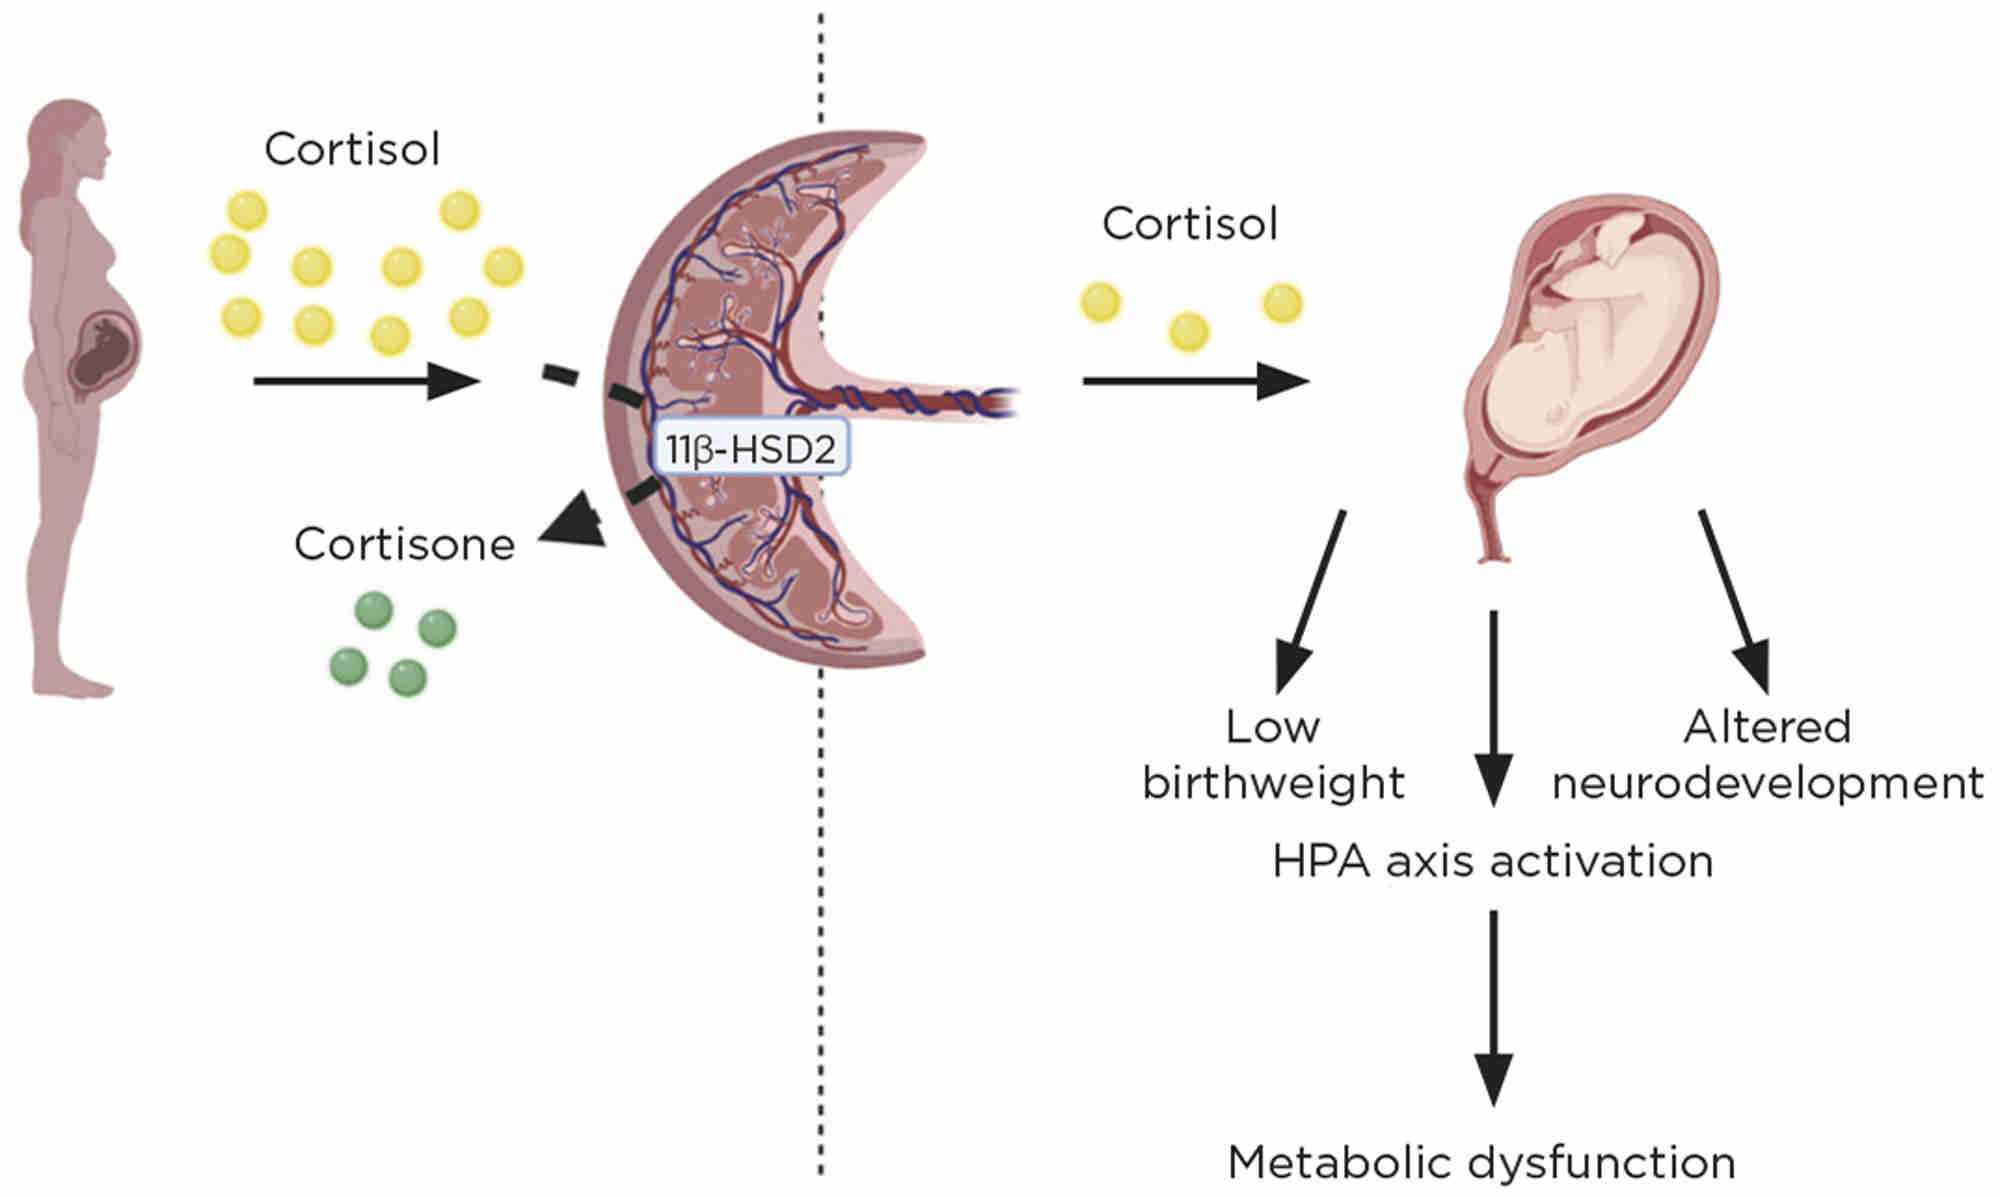 Maternal blood cortisol (yellow circles) reaches the placenta where it is partially metabolised by 11β-HSD2 into the inactive cortisone (green circles). An increase in cortisol transfer to the fetus (due to increased maternal levels, or reduced inactivation) results in low birthweight, long term activation of the HPA and alterations in development of the limbic system. This links the in utero environment with adult health and disease. Figure created with BioRender.com